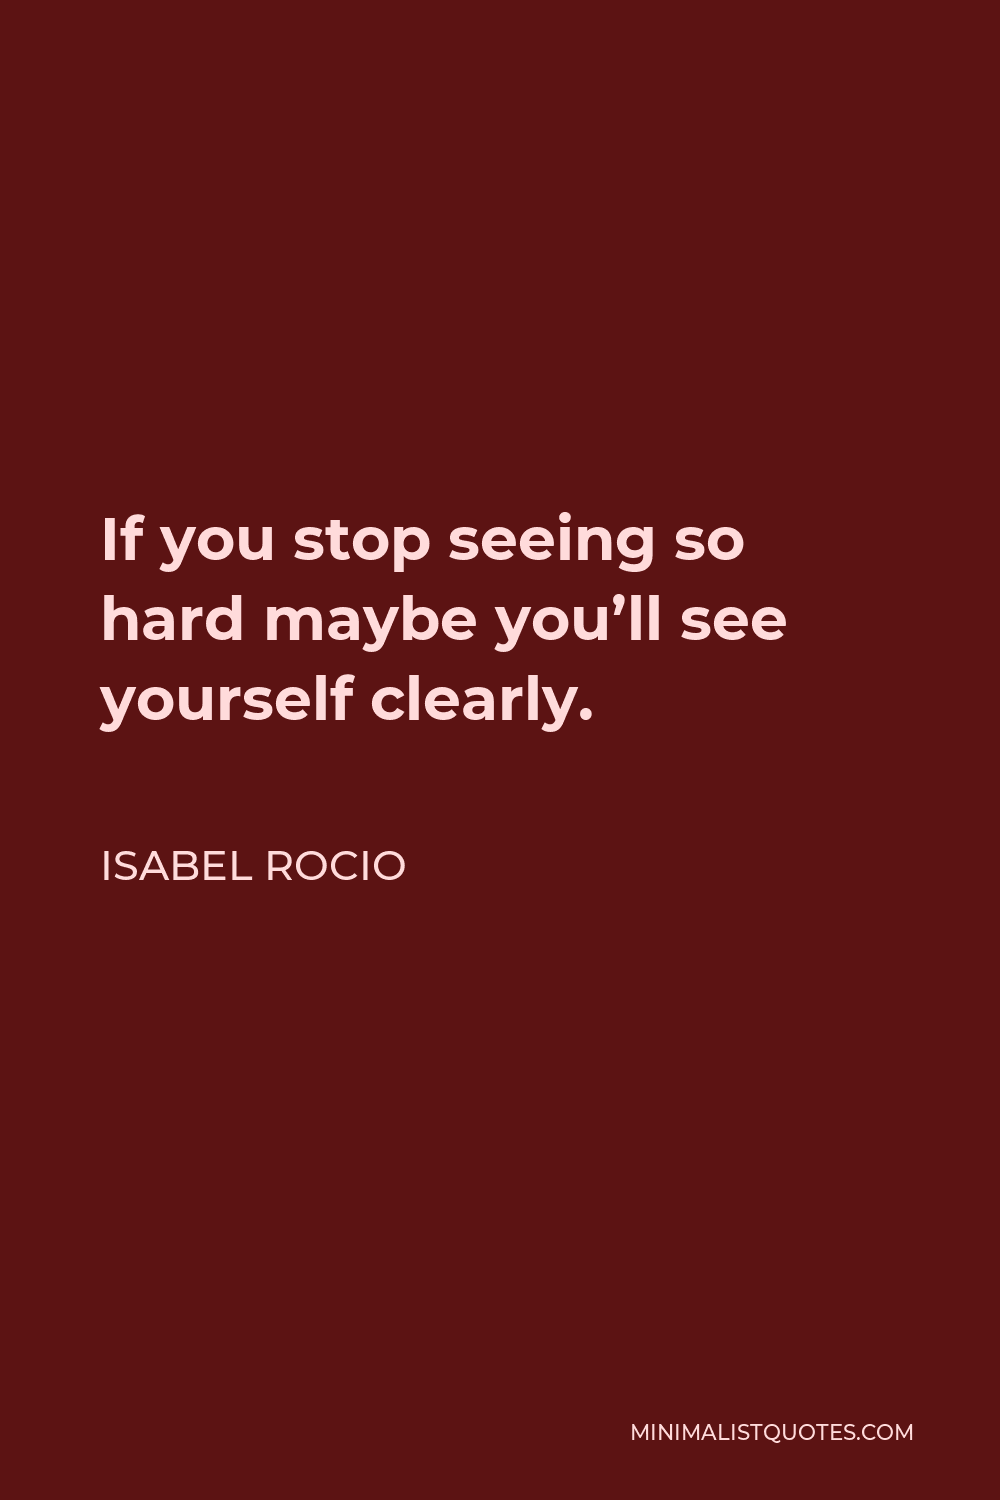 Isabel Rocio Quote - If you stop seeing so hard maybe you’ll see yourself clearly.